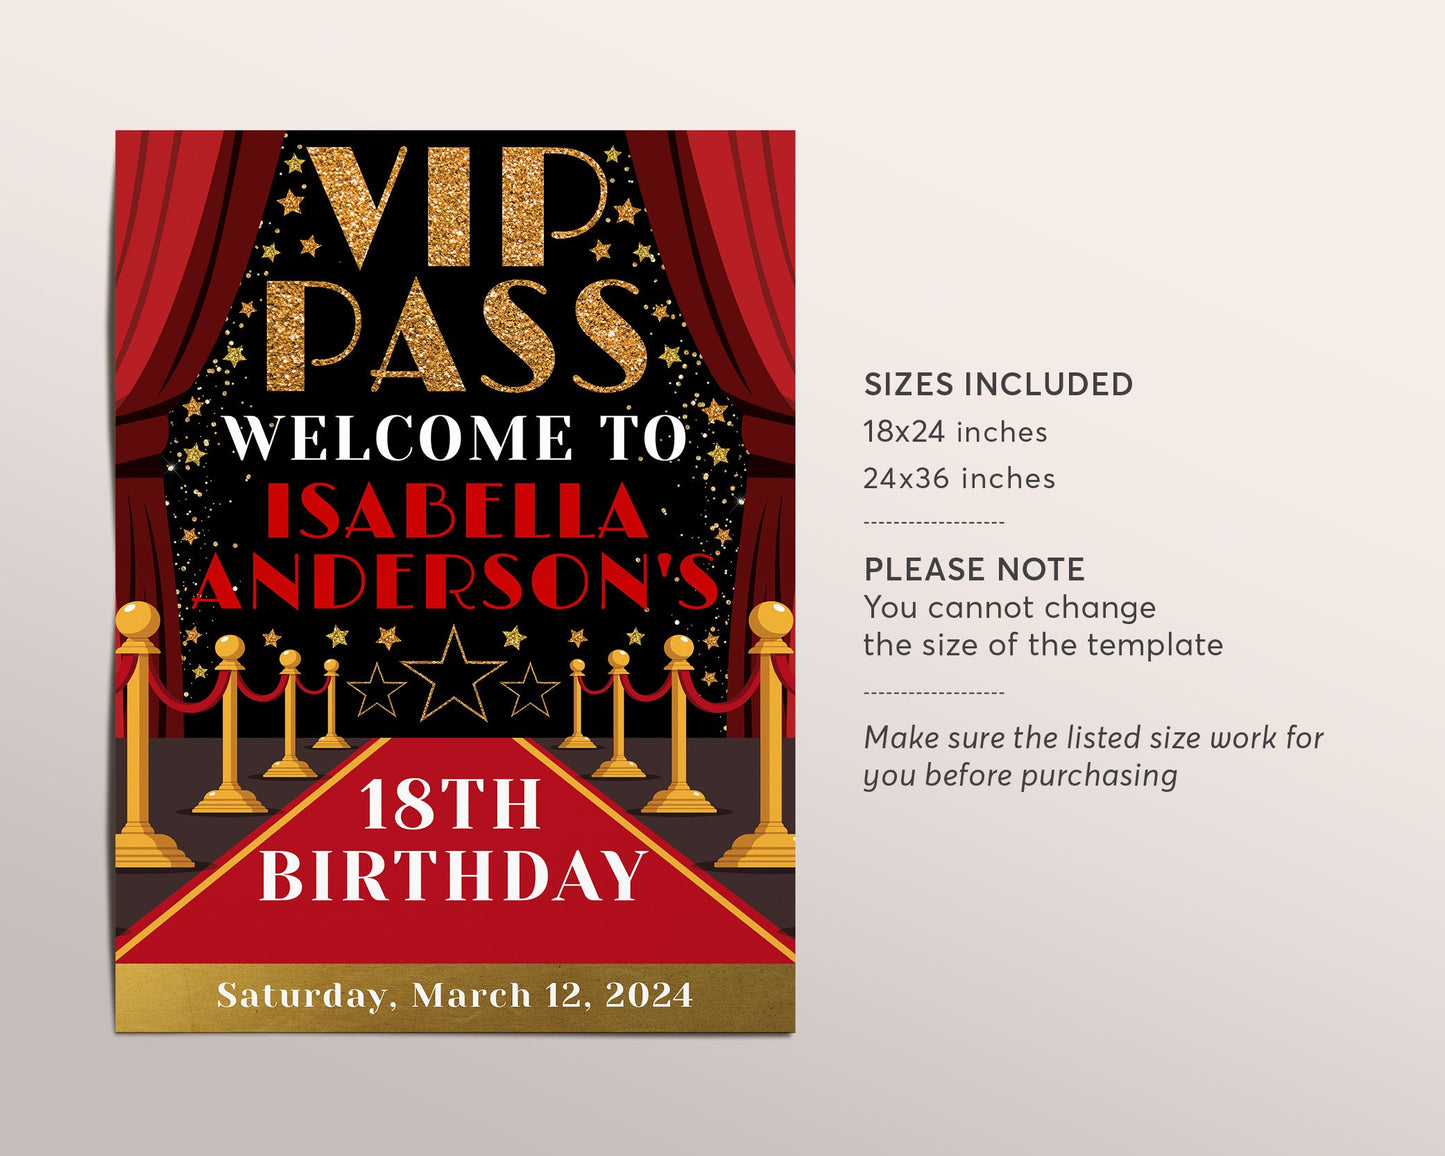 VIP Pass Birthday Welcome Sign Editable Template, Red Carpet Hollywood Theme Party Poster, VIP Access Sweet 16 18th Birthday Decor Printable